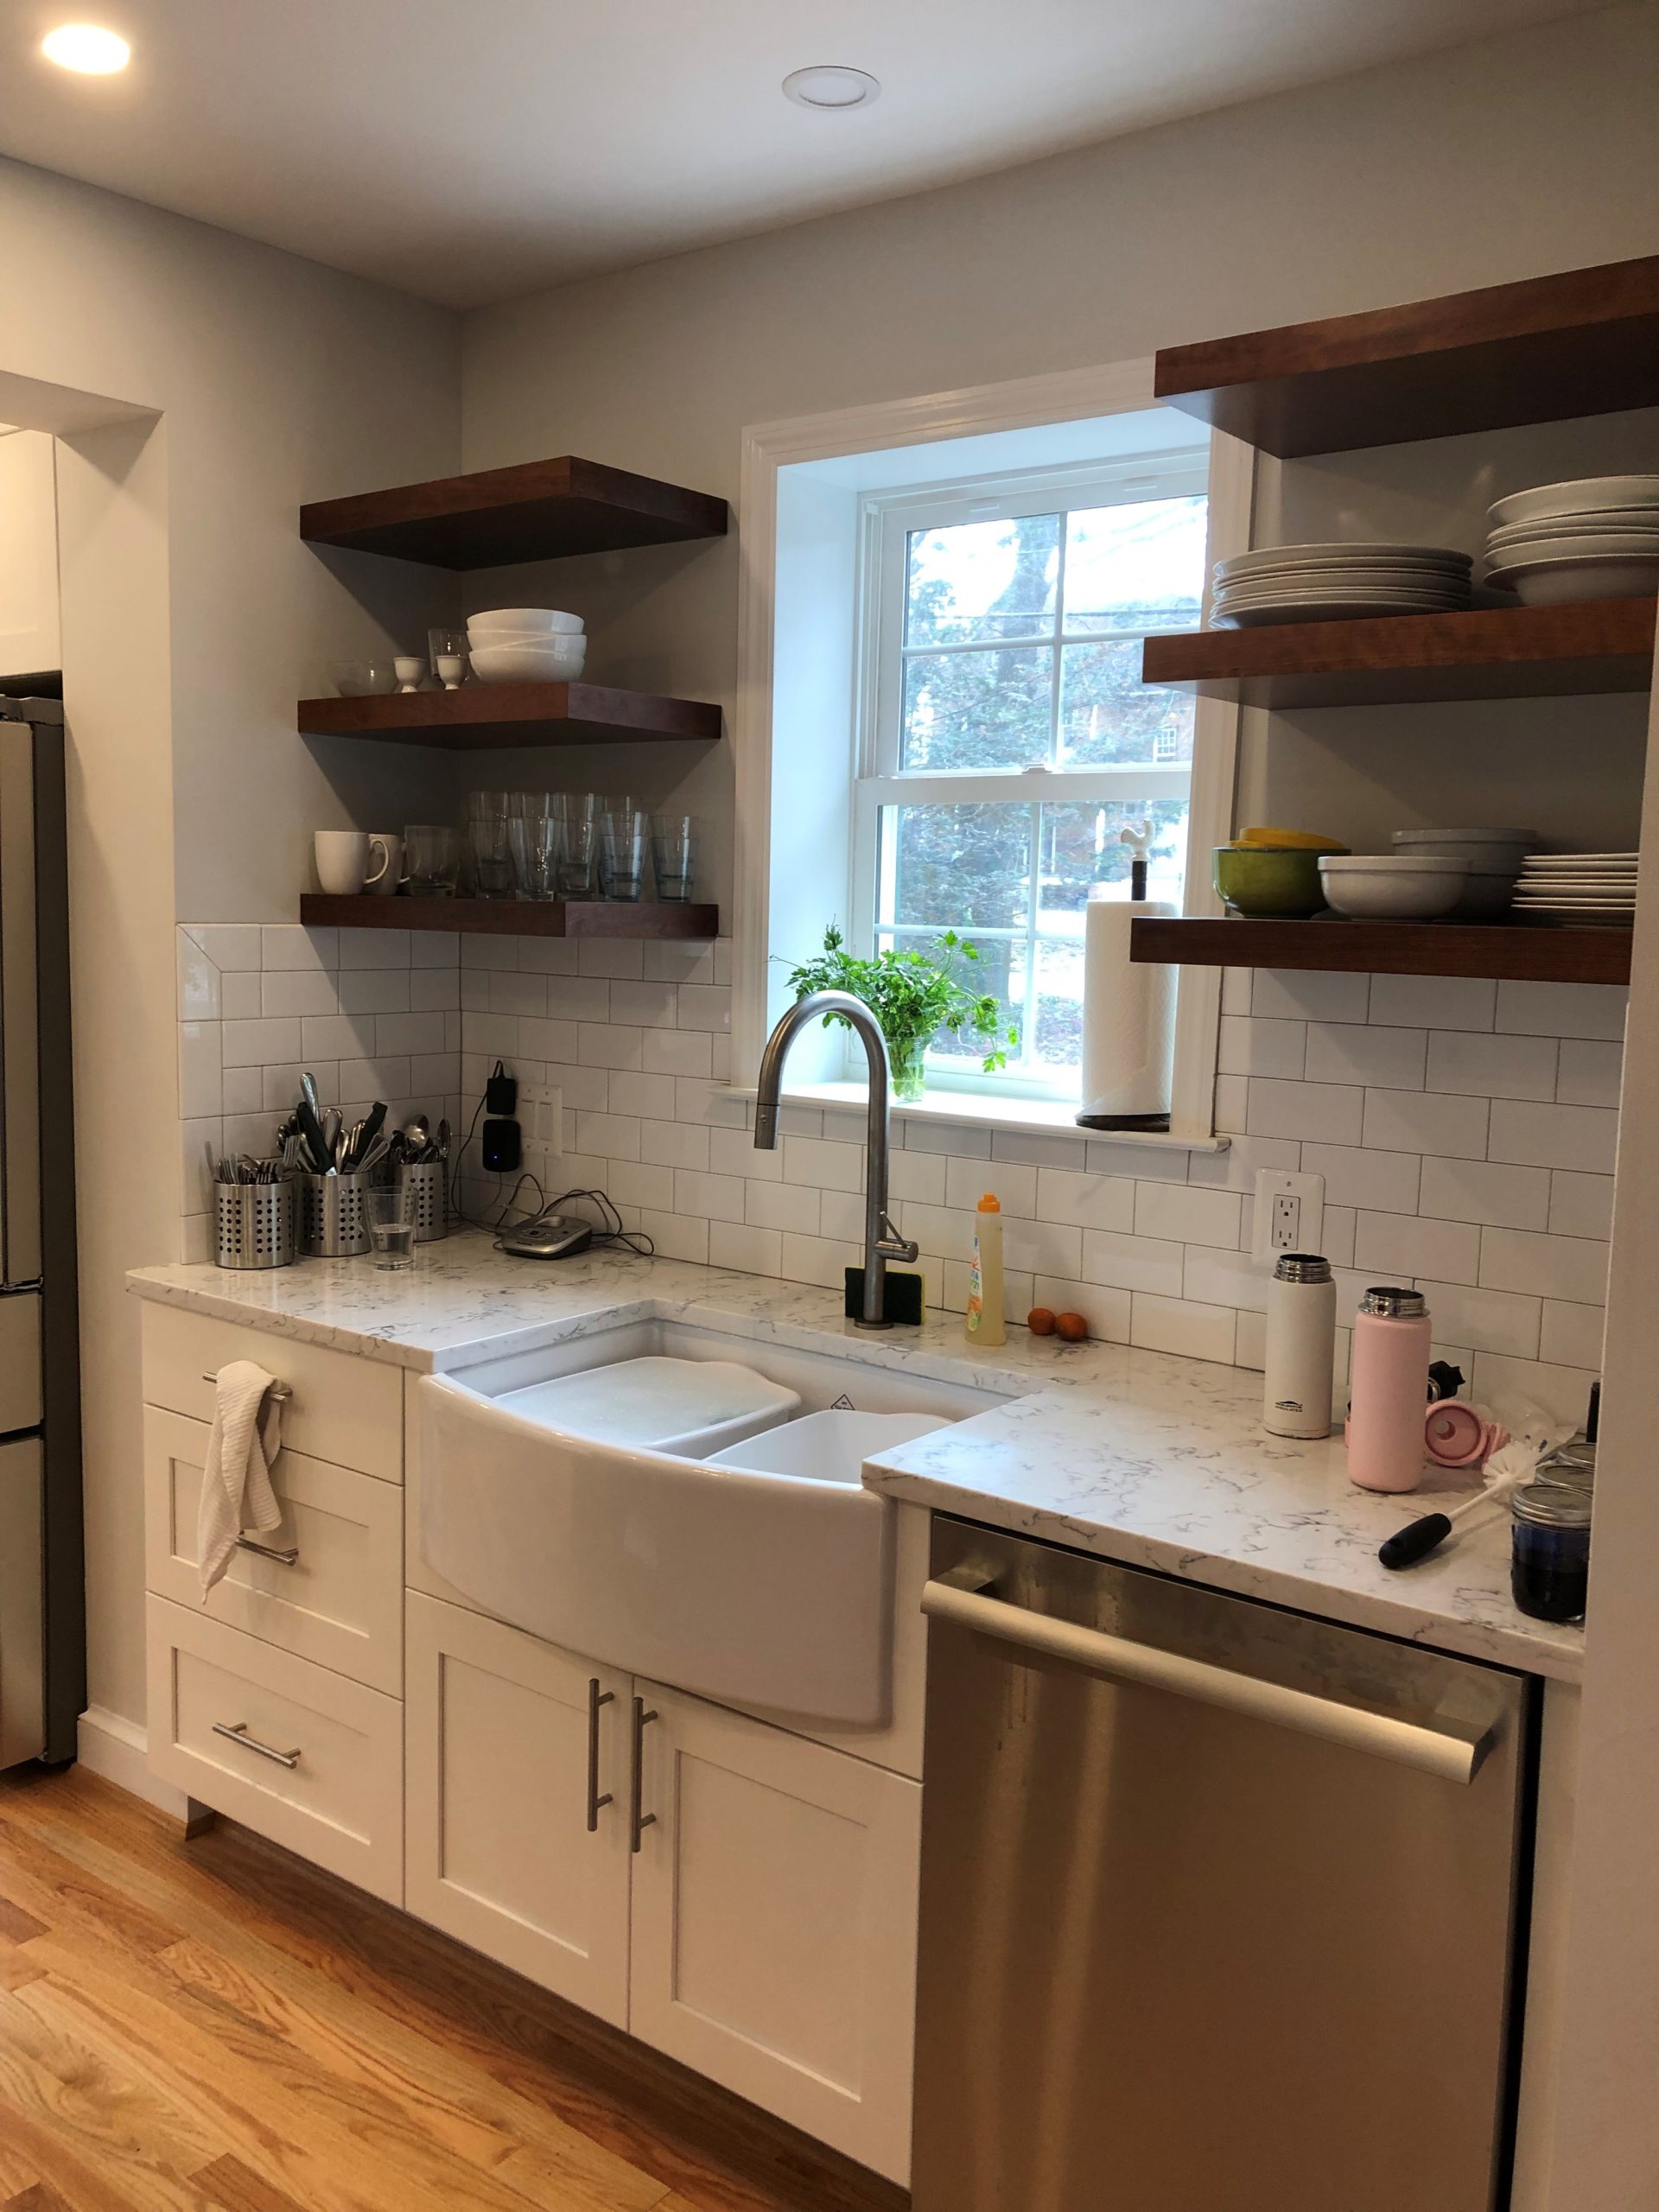 a kitchen with white cabinets and wooden floors, with open wooden shelving above countertops